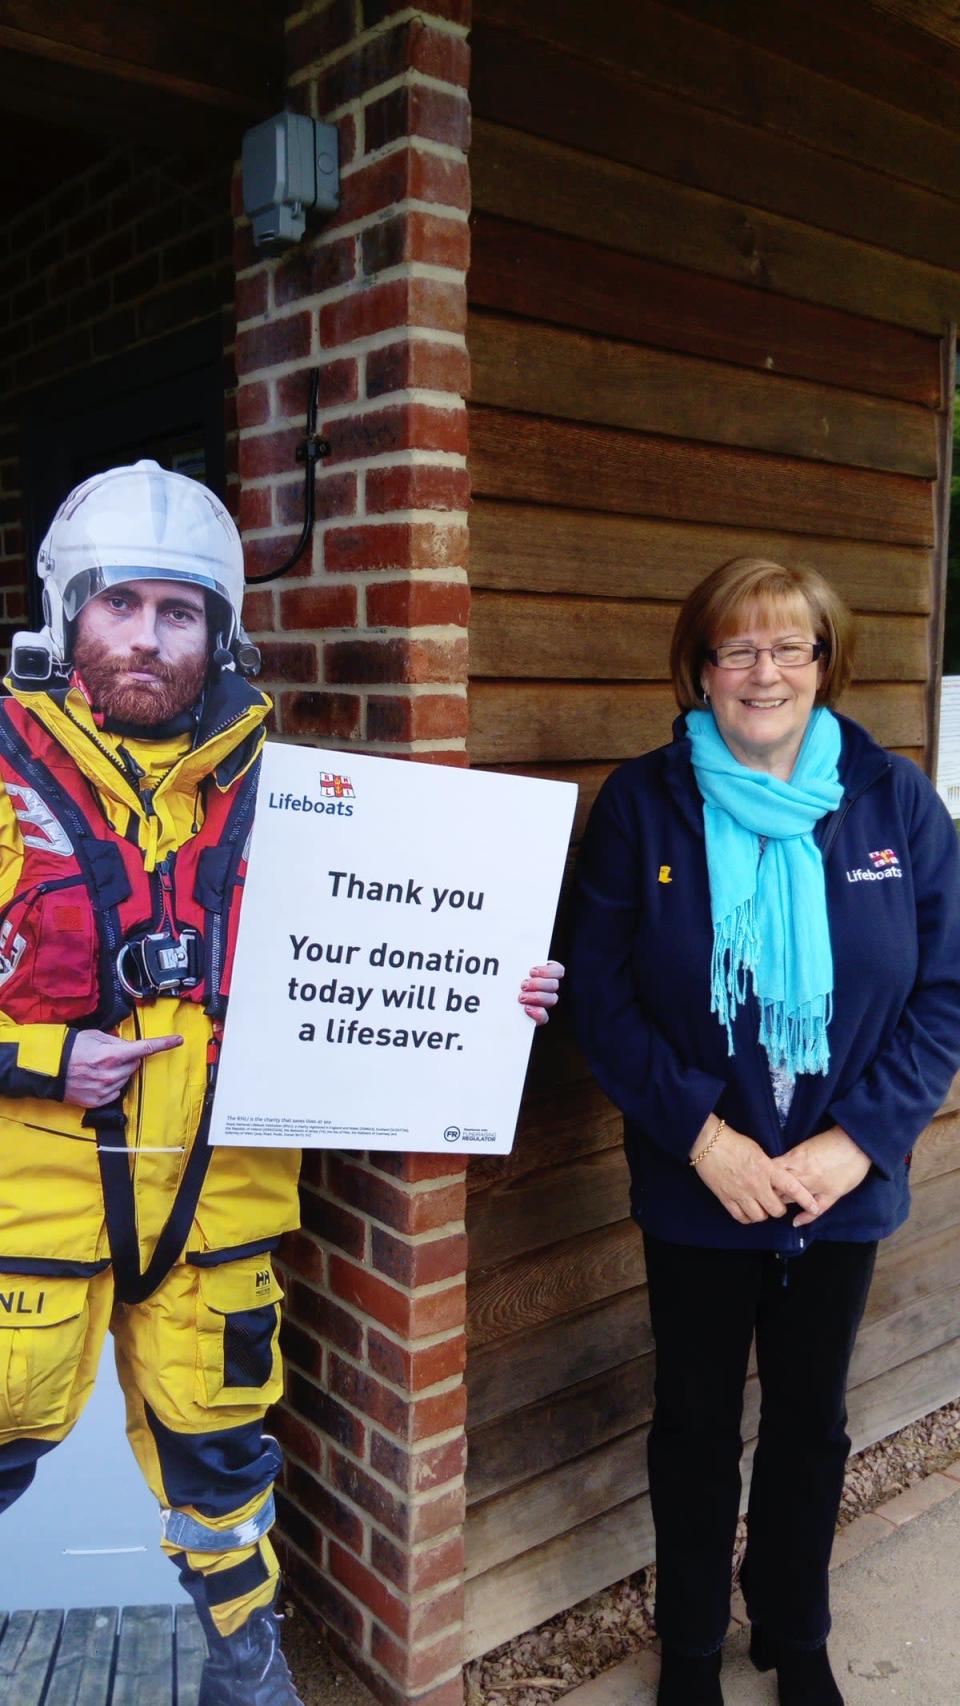 Lynn Spillett, 62 and from Littlehampton, West Sussex received her MBE for services to the RNLI in Torbay, Devon where in seven years as chair of fundraising the branch raised more than £700,000. She is among 200 recipients of awards in the 2022 Queen’s Birthday Honours list who have been invited to the Queen’s state funeral on Monday.